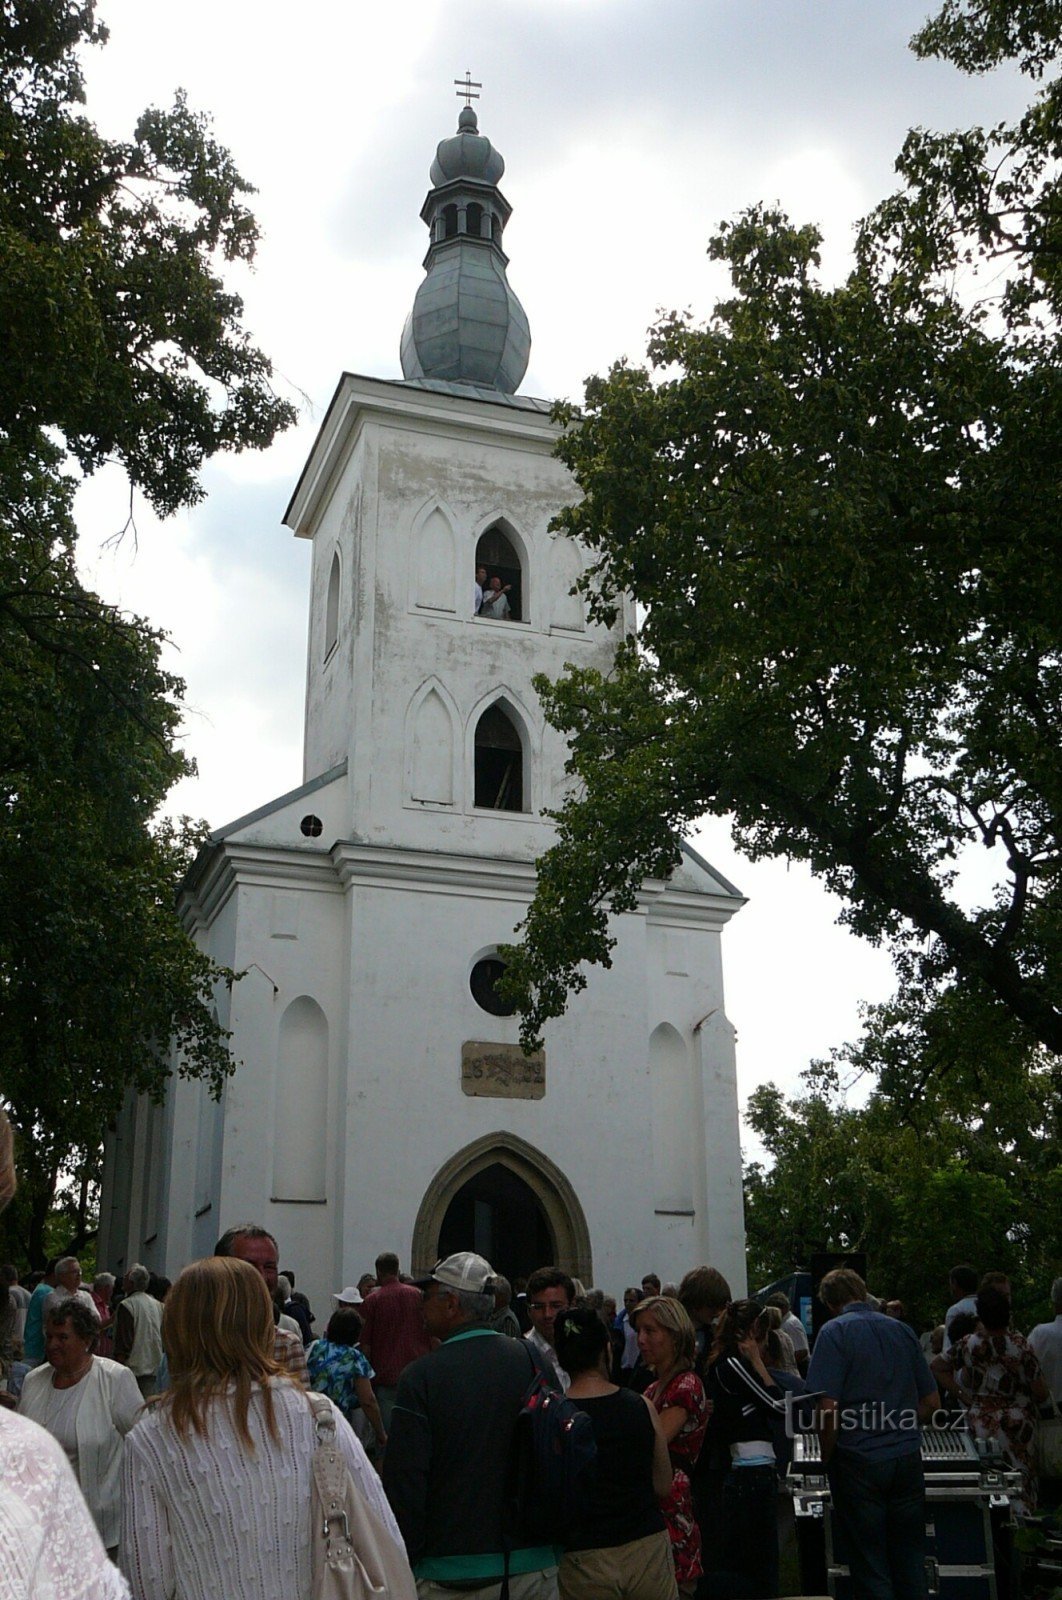 The hill near the church of St. Jakuba nad Ivančicemi is a pilgrimage full of people